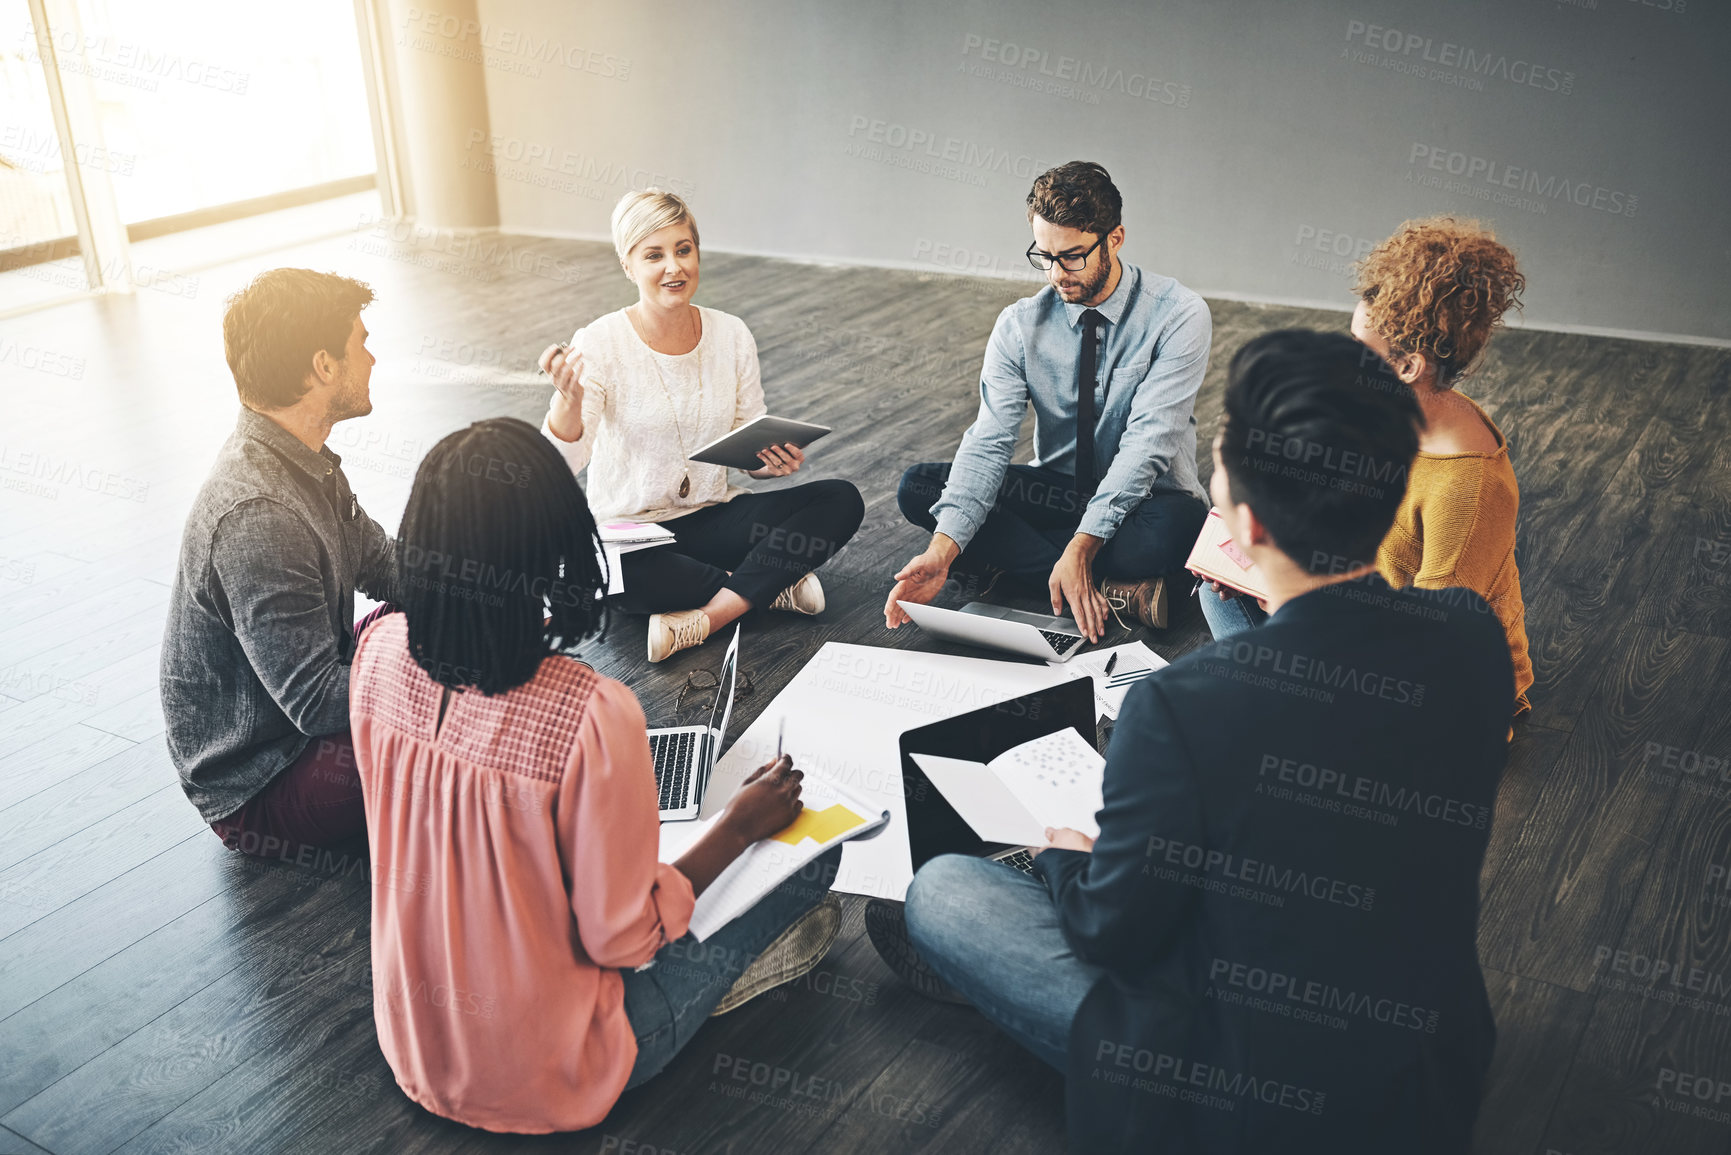 Buy stock photo Shot of a diverse group of creative employees having a meeting inside